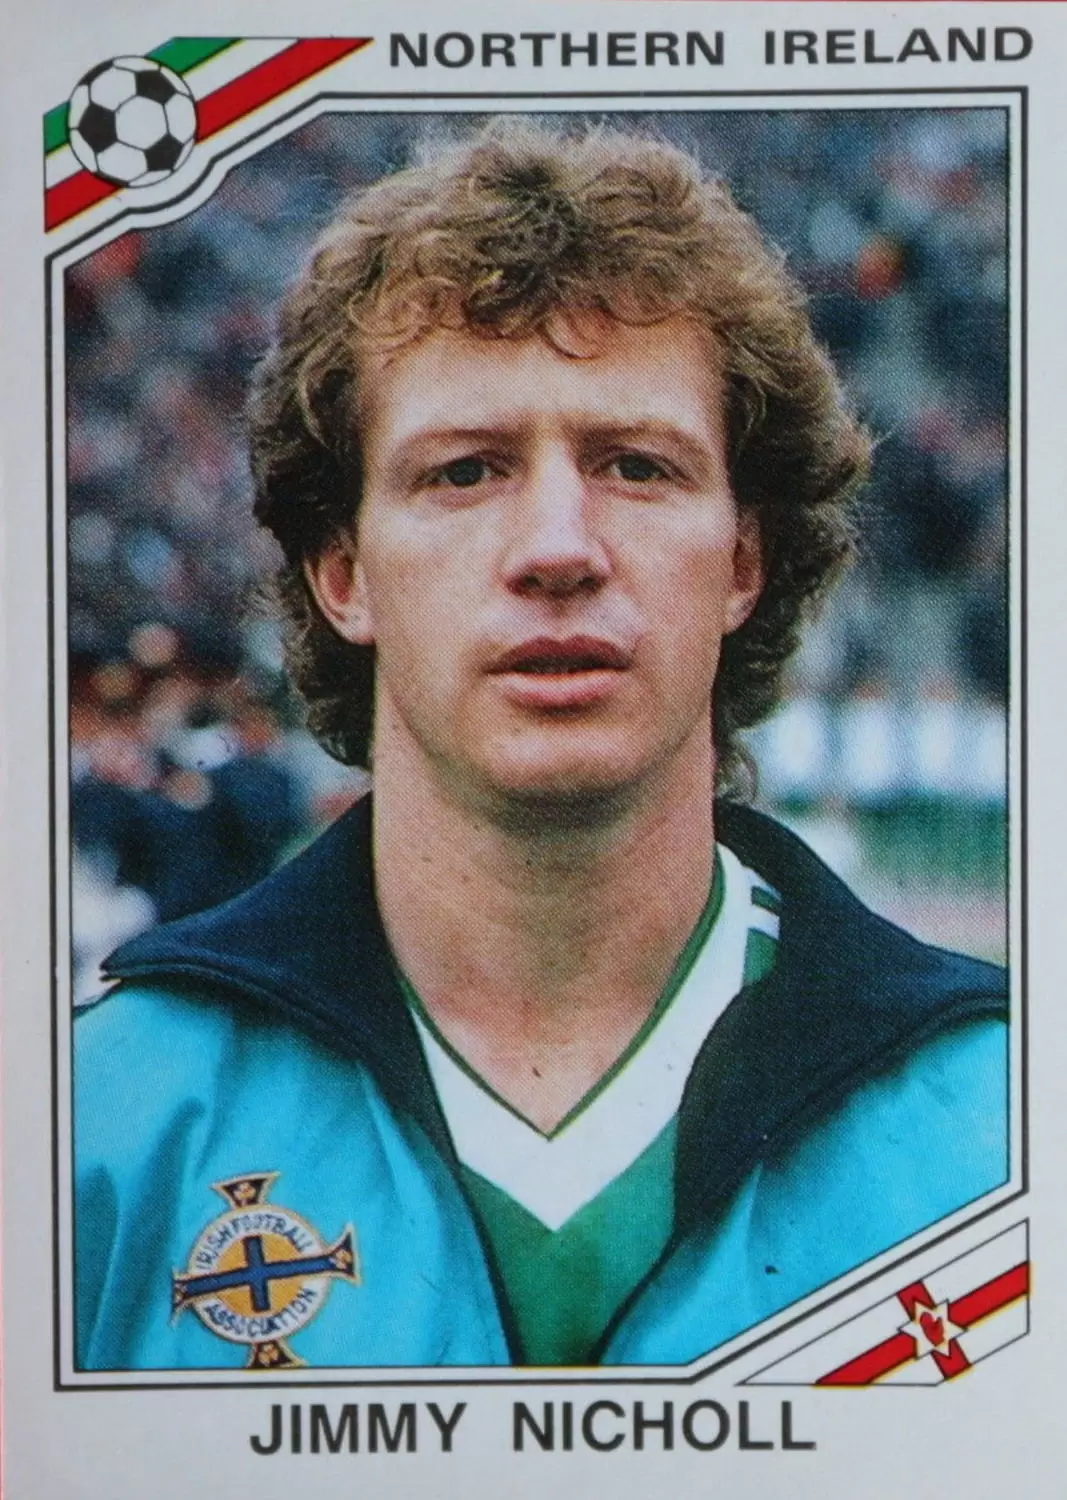 Mexico 86 World Cup - Jimmy Nicholl - Irlande du Nord